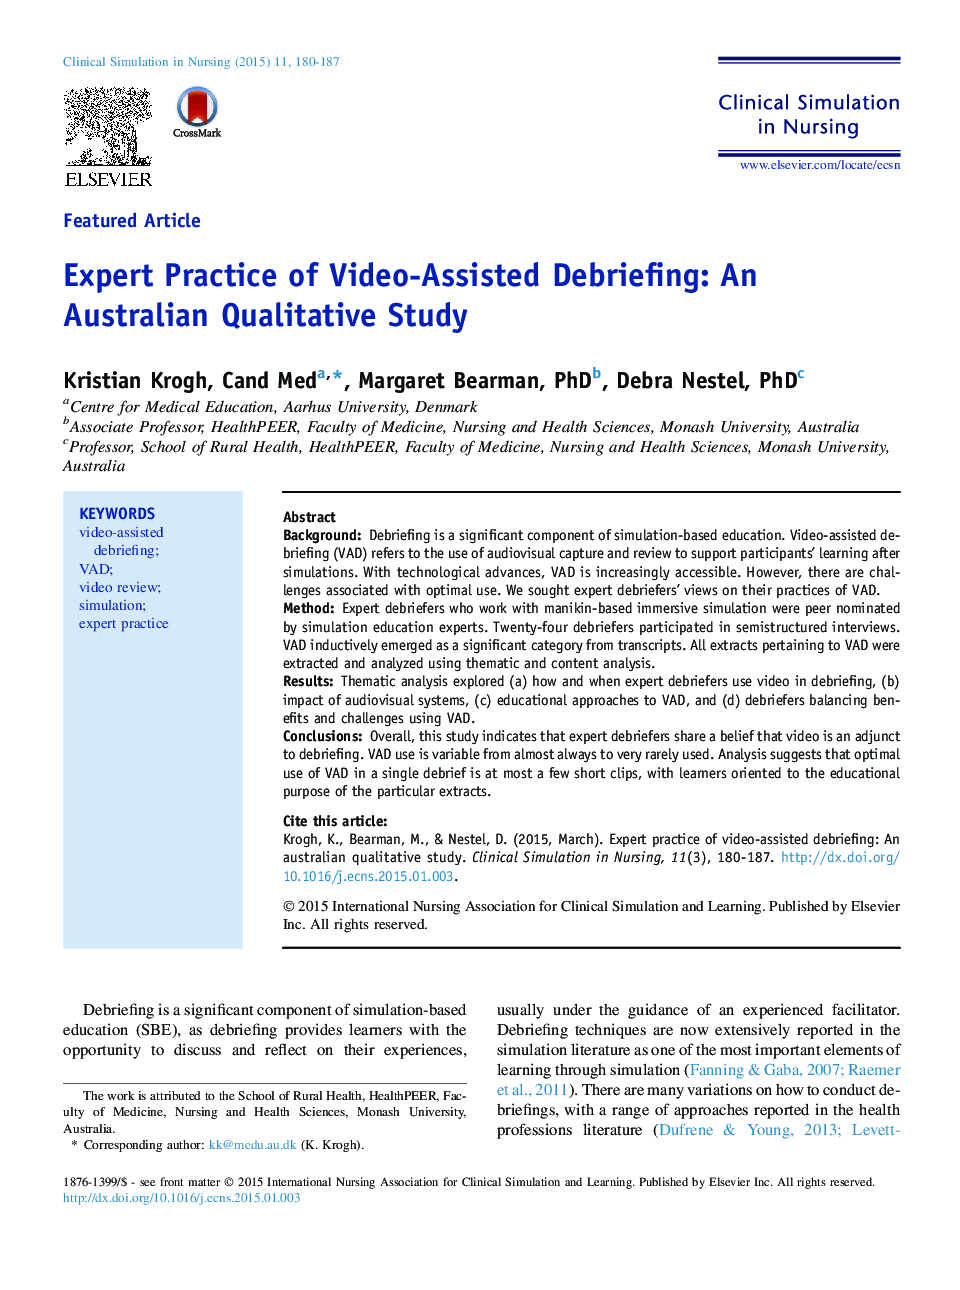 Expert Practice of Video-Assisted Debriefing: An Australian Qualitative Study 